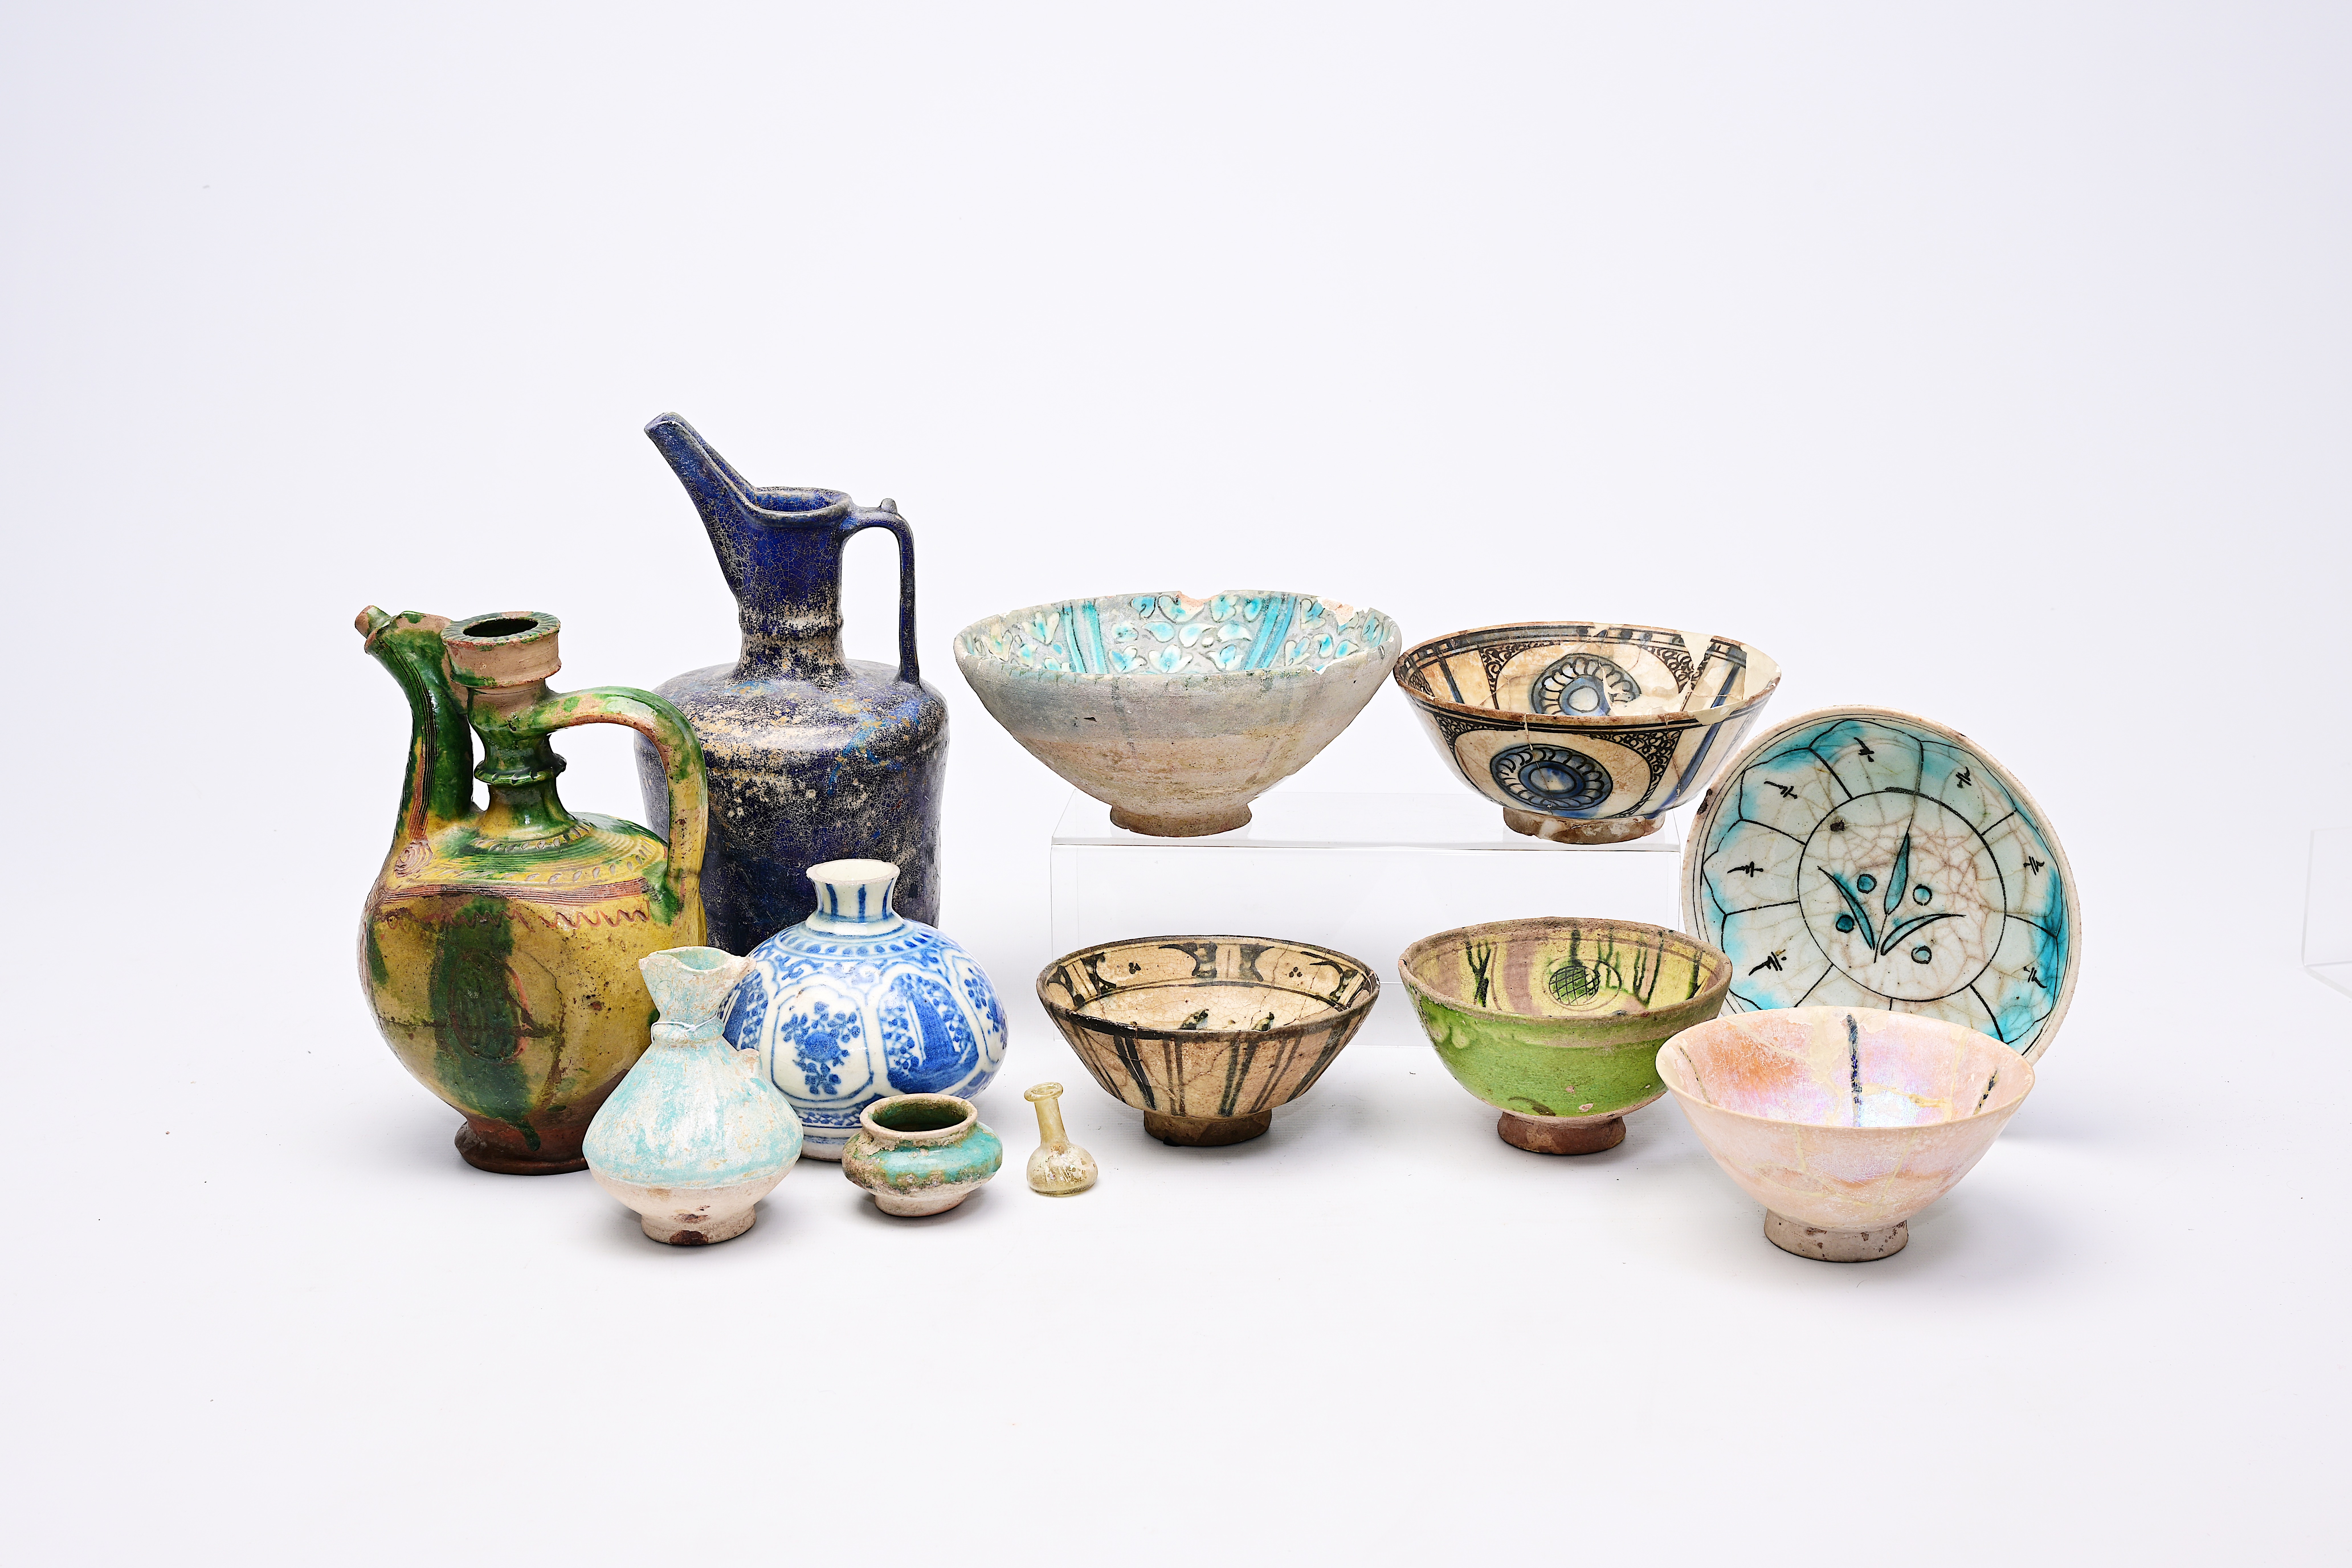 Twelve Ottoman and Persian pottery wares, 13th C. and later